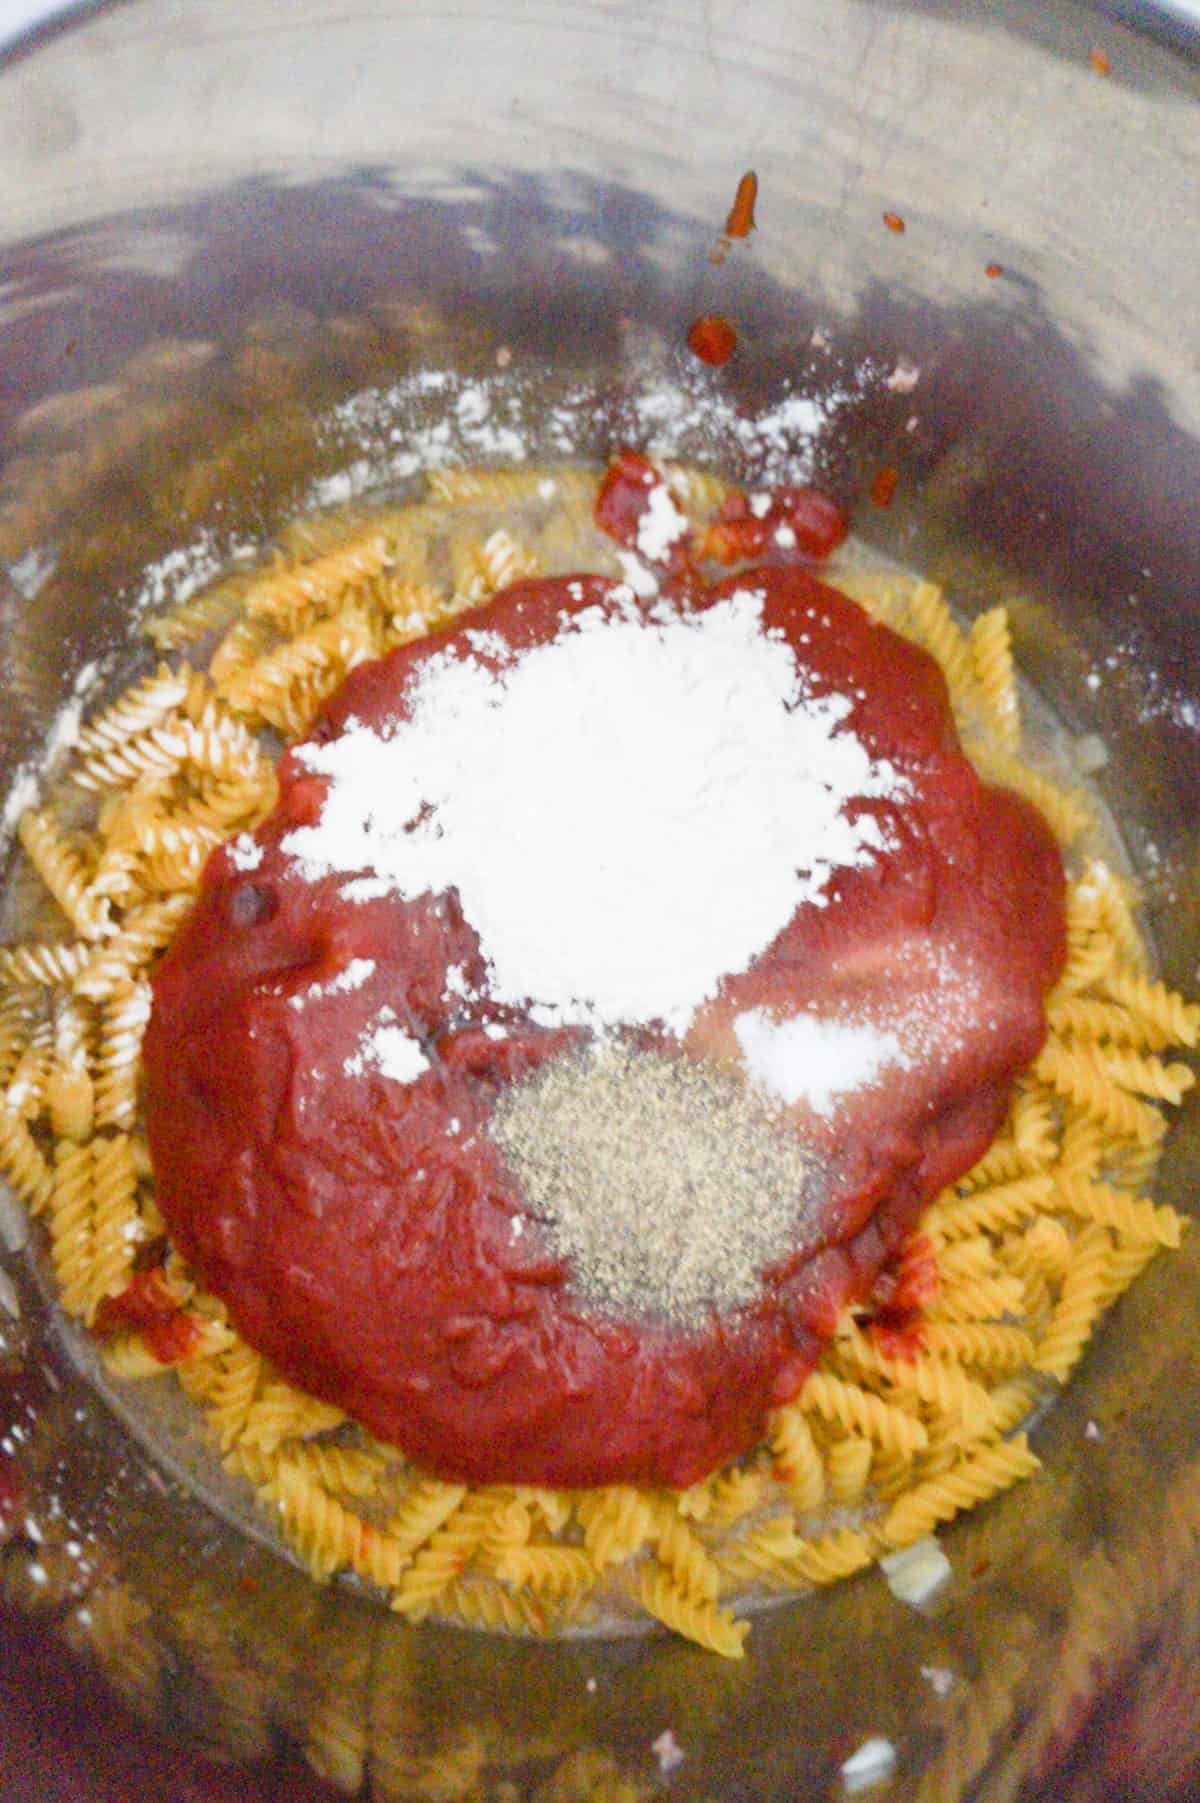 onion powder, pepper and ketchup on top of uncooked fusilli noodles in an Instant Pot